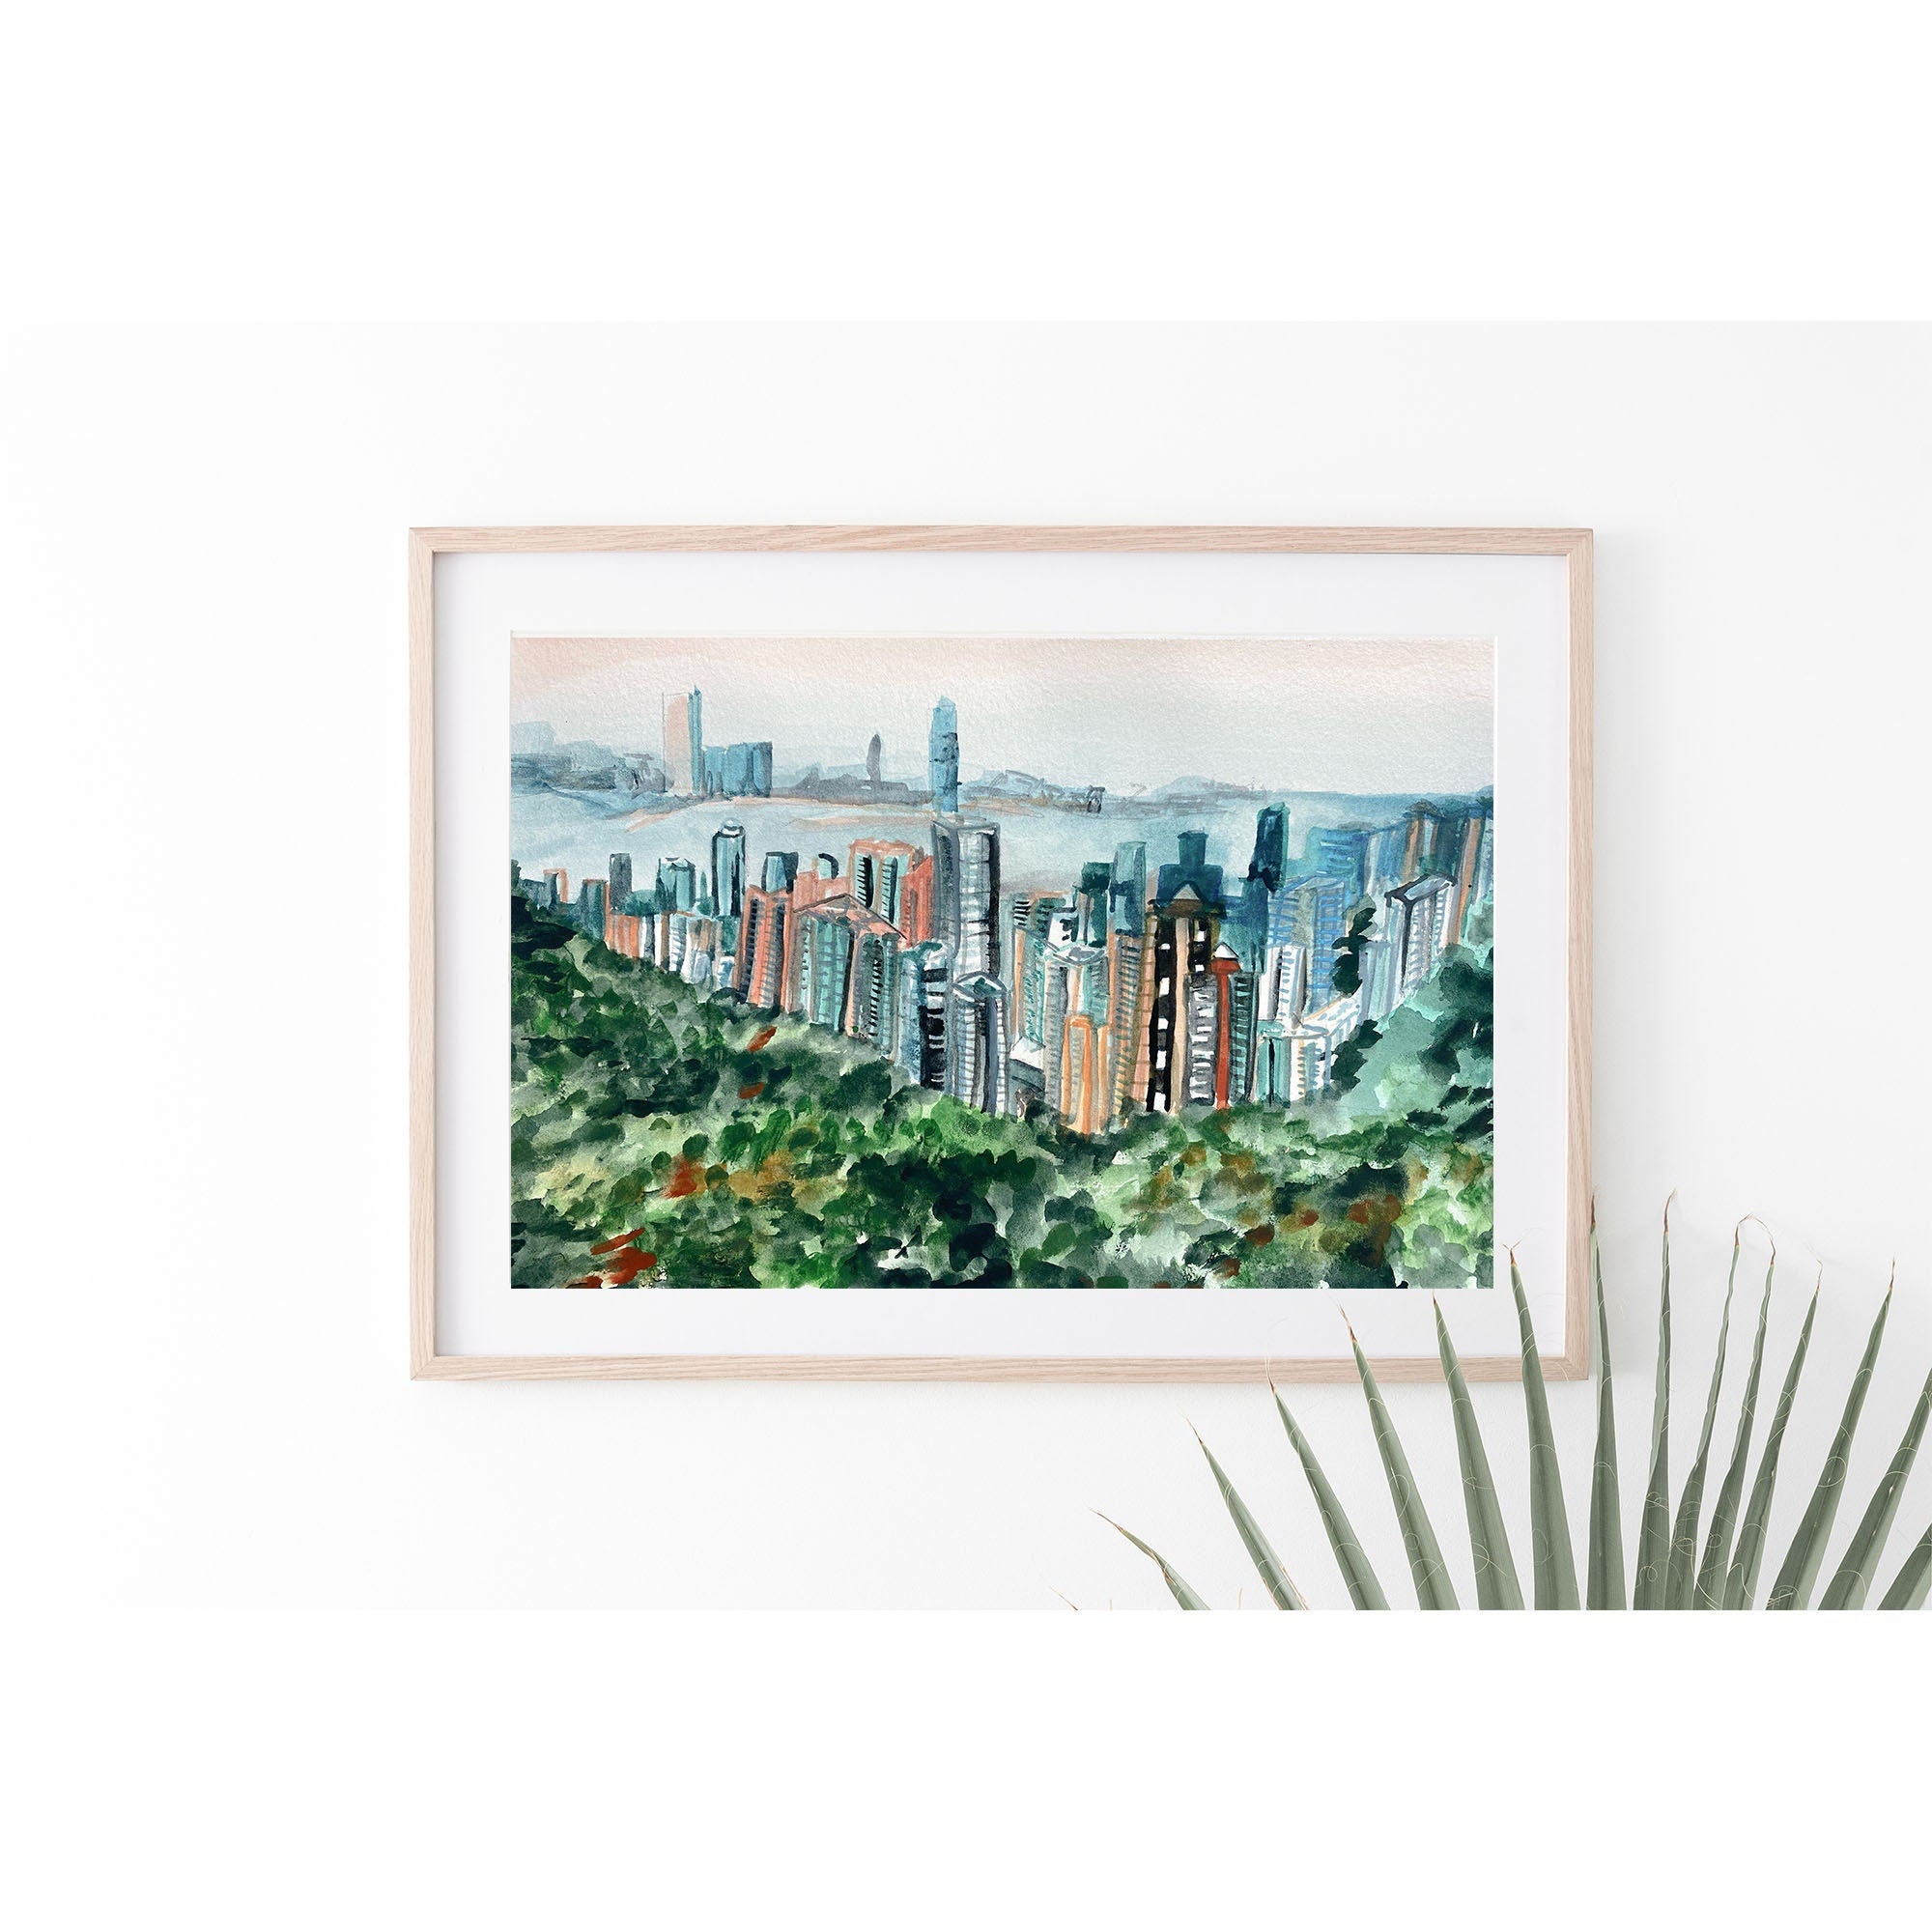 Hong Kong City Skyline print of painting by Medjool Studio. Print of watercolour painting of the Hong Kong skyline from the peak overlooking the Midlevel District in Hong Kong.